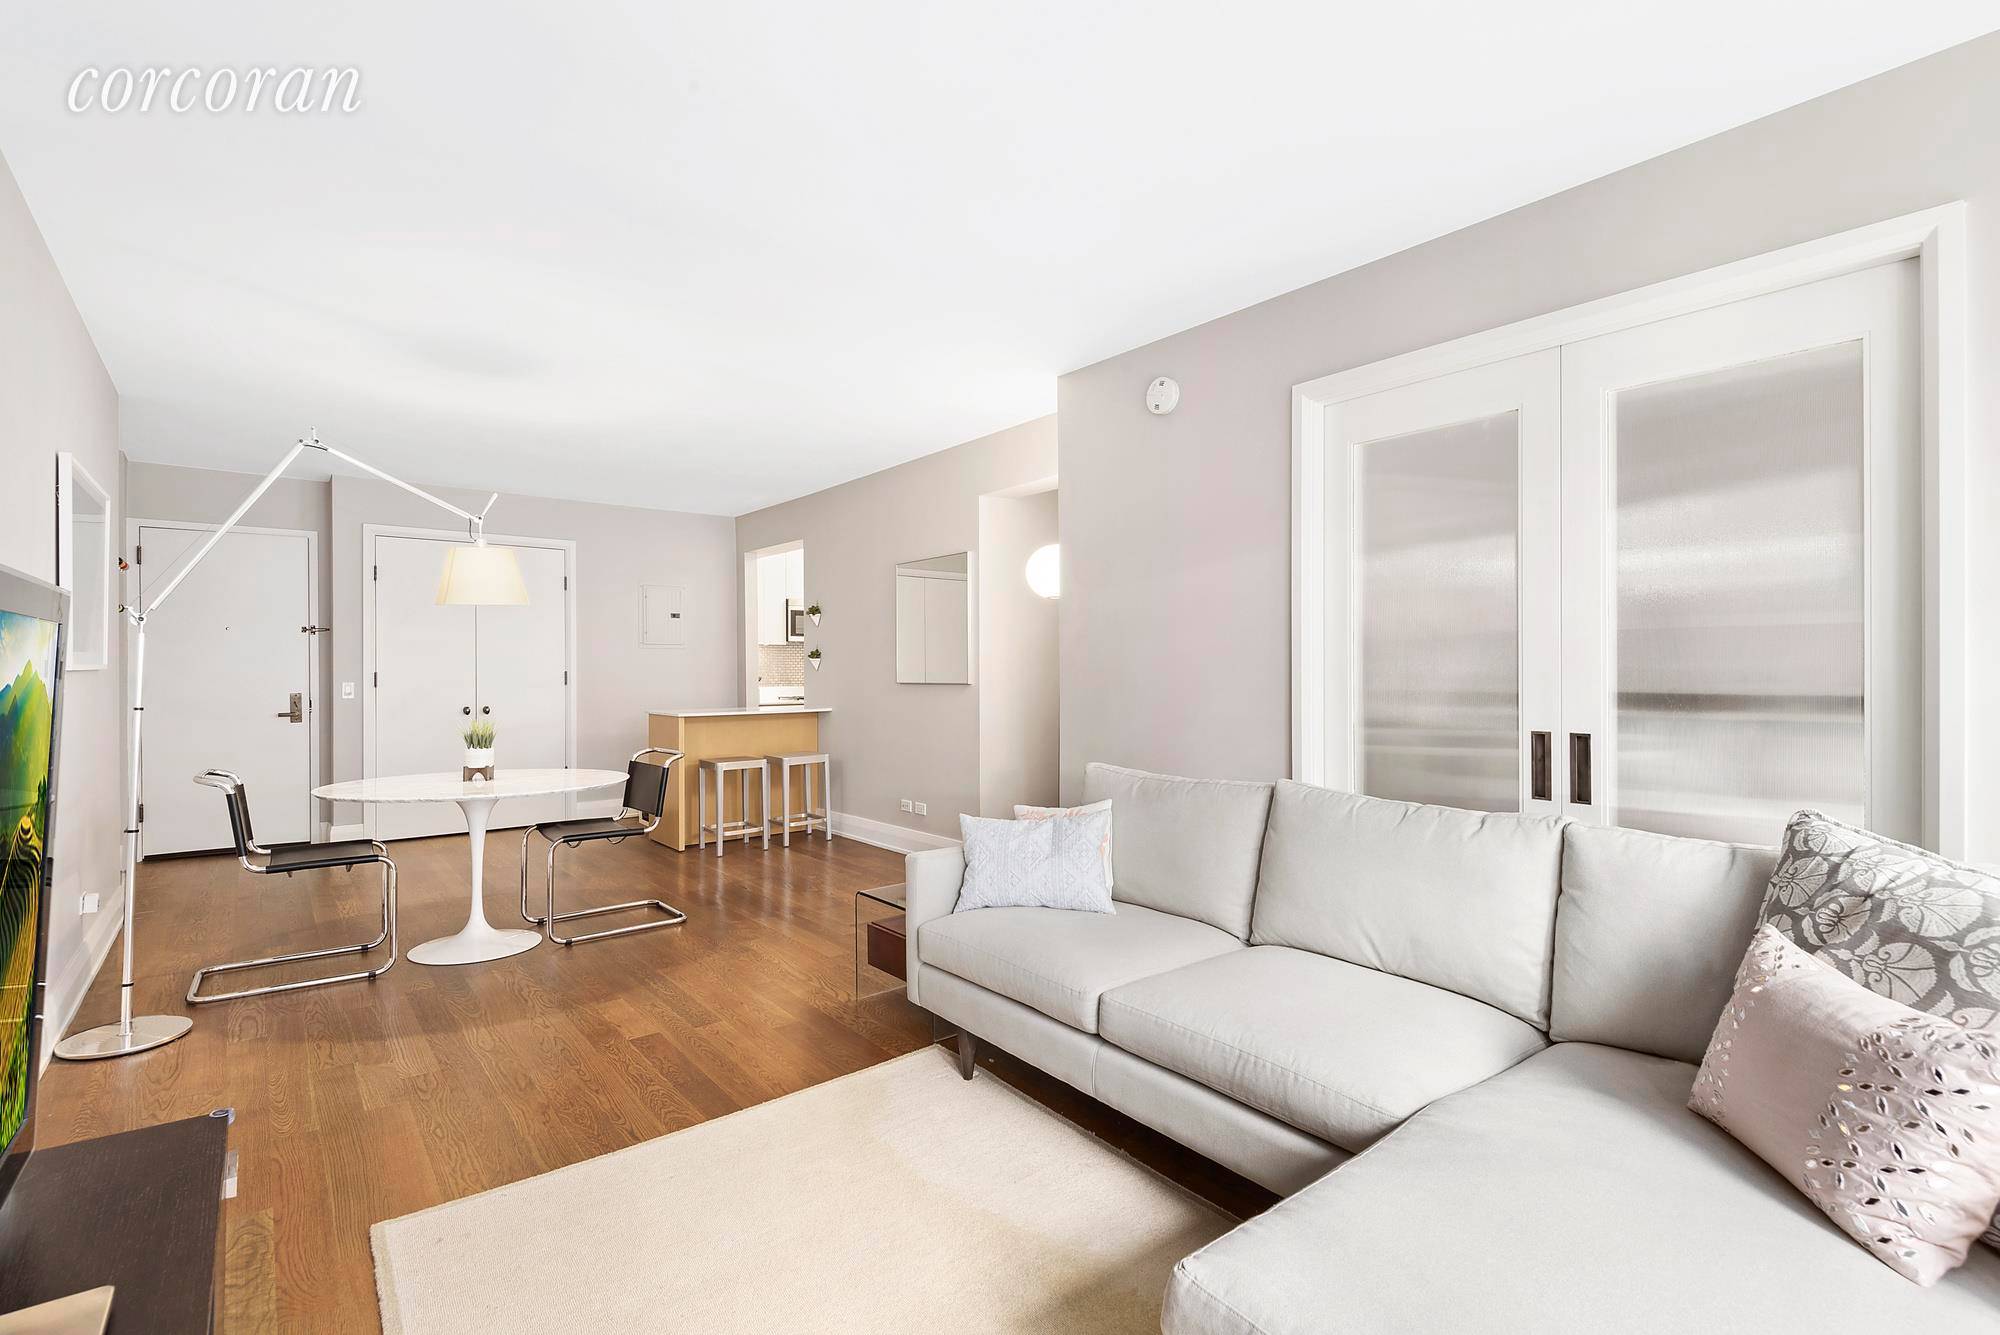 Welcome to a perfectly proportioned MINT 1 bedroom condo at 211 East 51st Street !